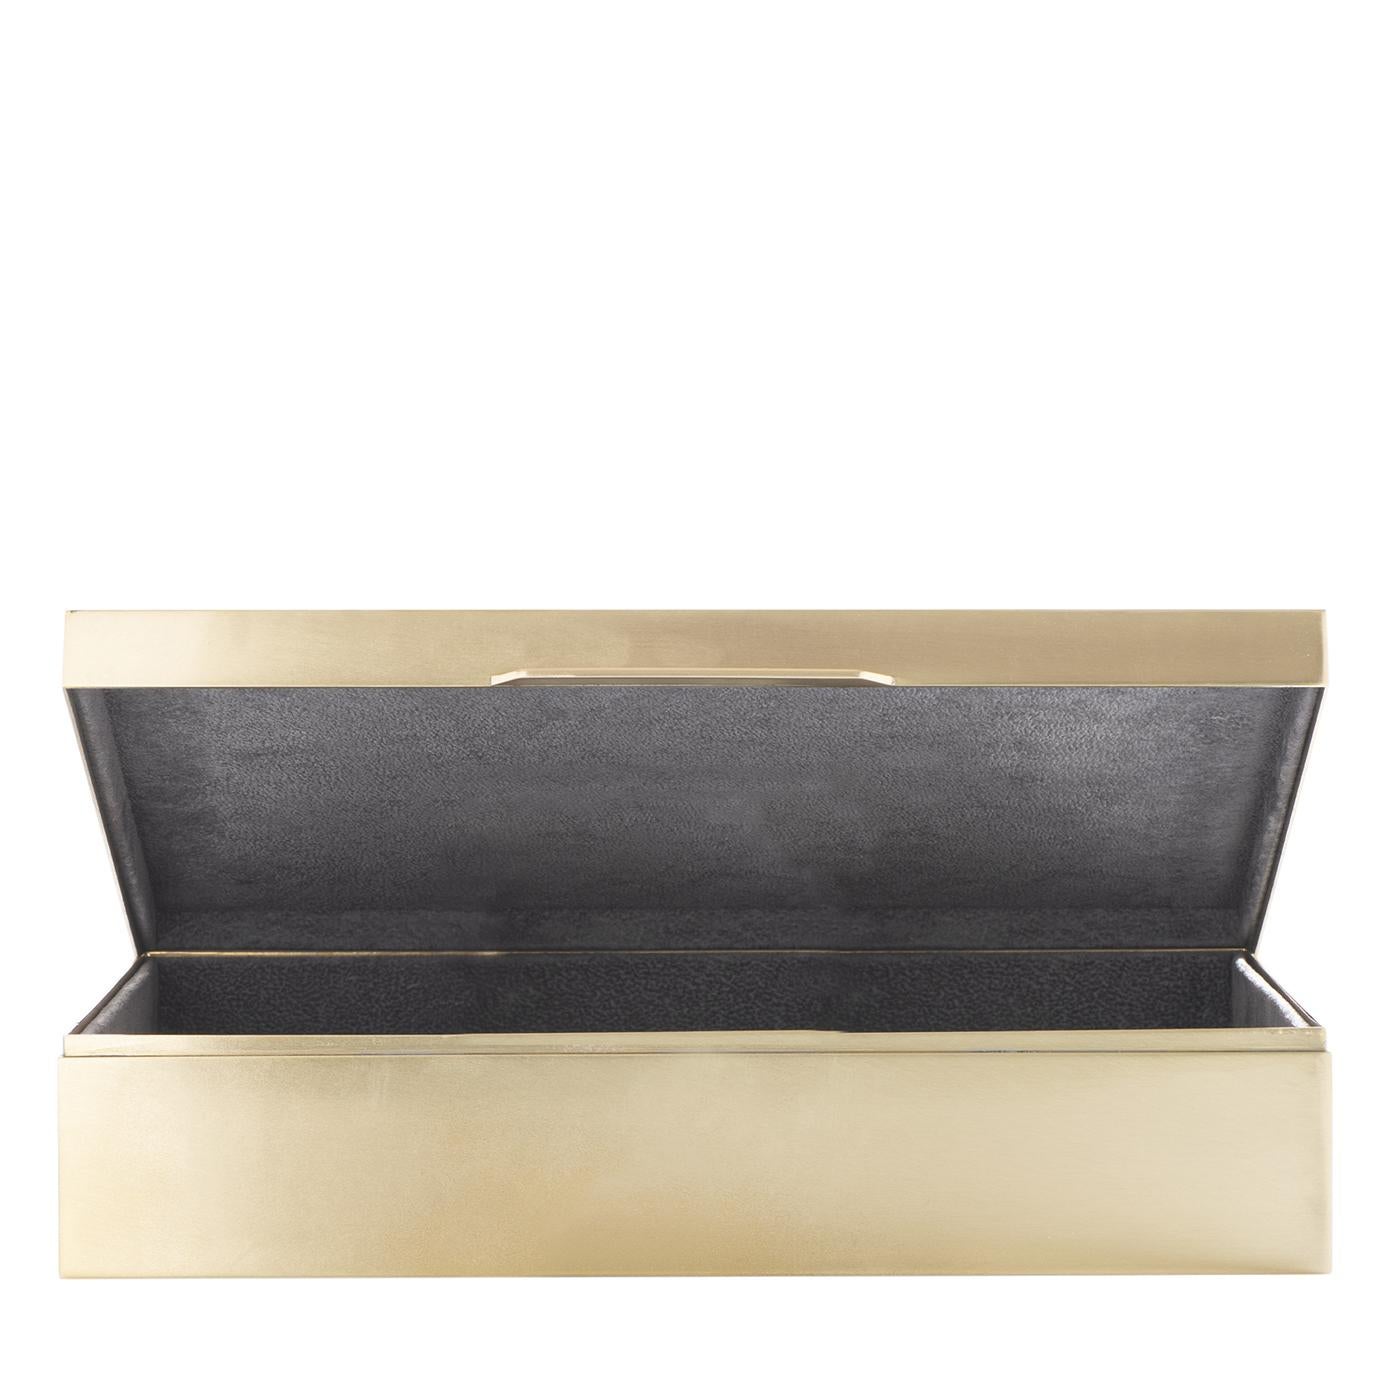 Crafted in brass and lined in velvet, this original box by Florentine luxury experts Badari features a Hercules beetle topper, ready to face any intruder. An eye-catching accent for any space, the box can be displayed on a desk, bookshelf or console